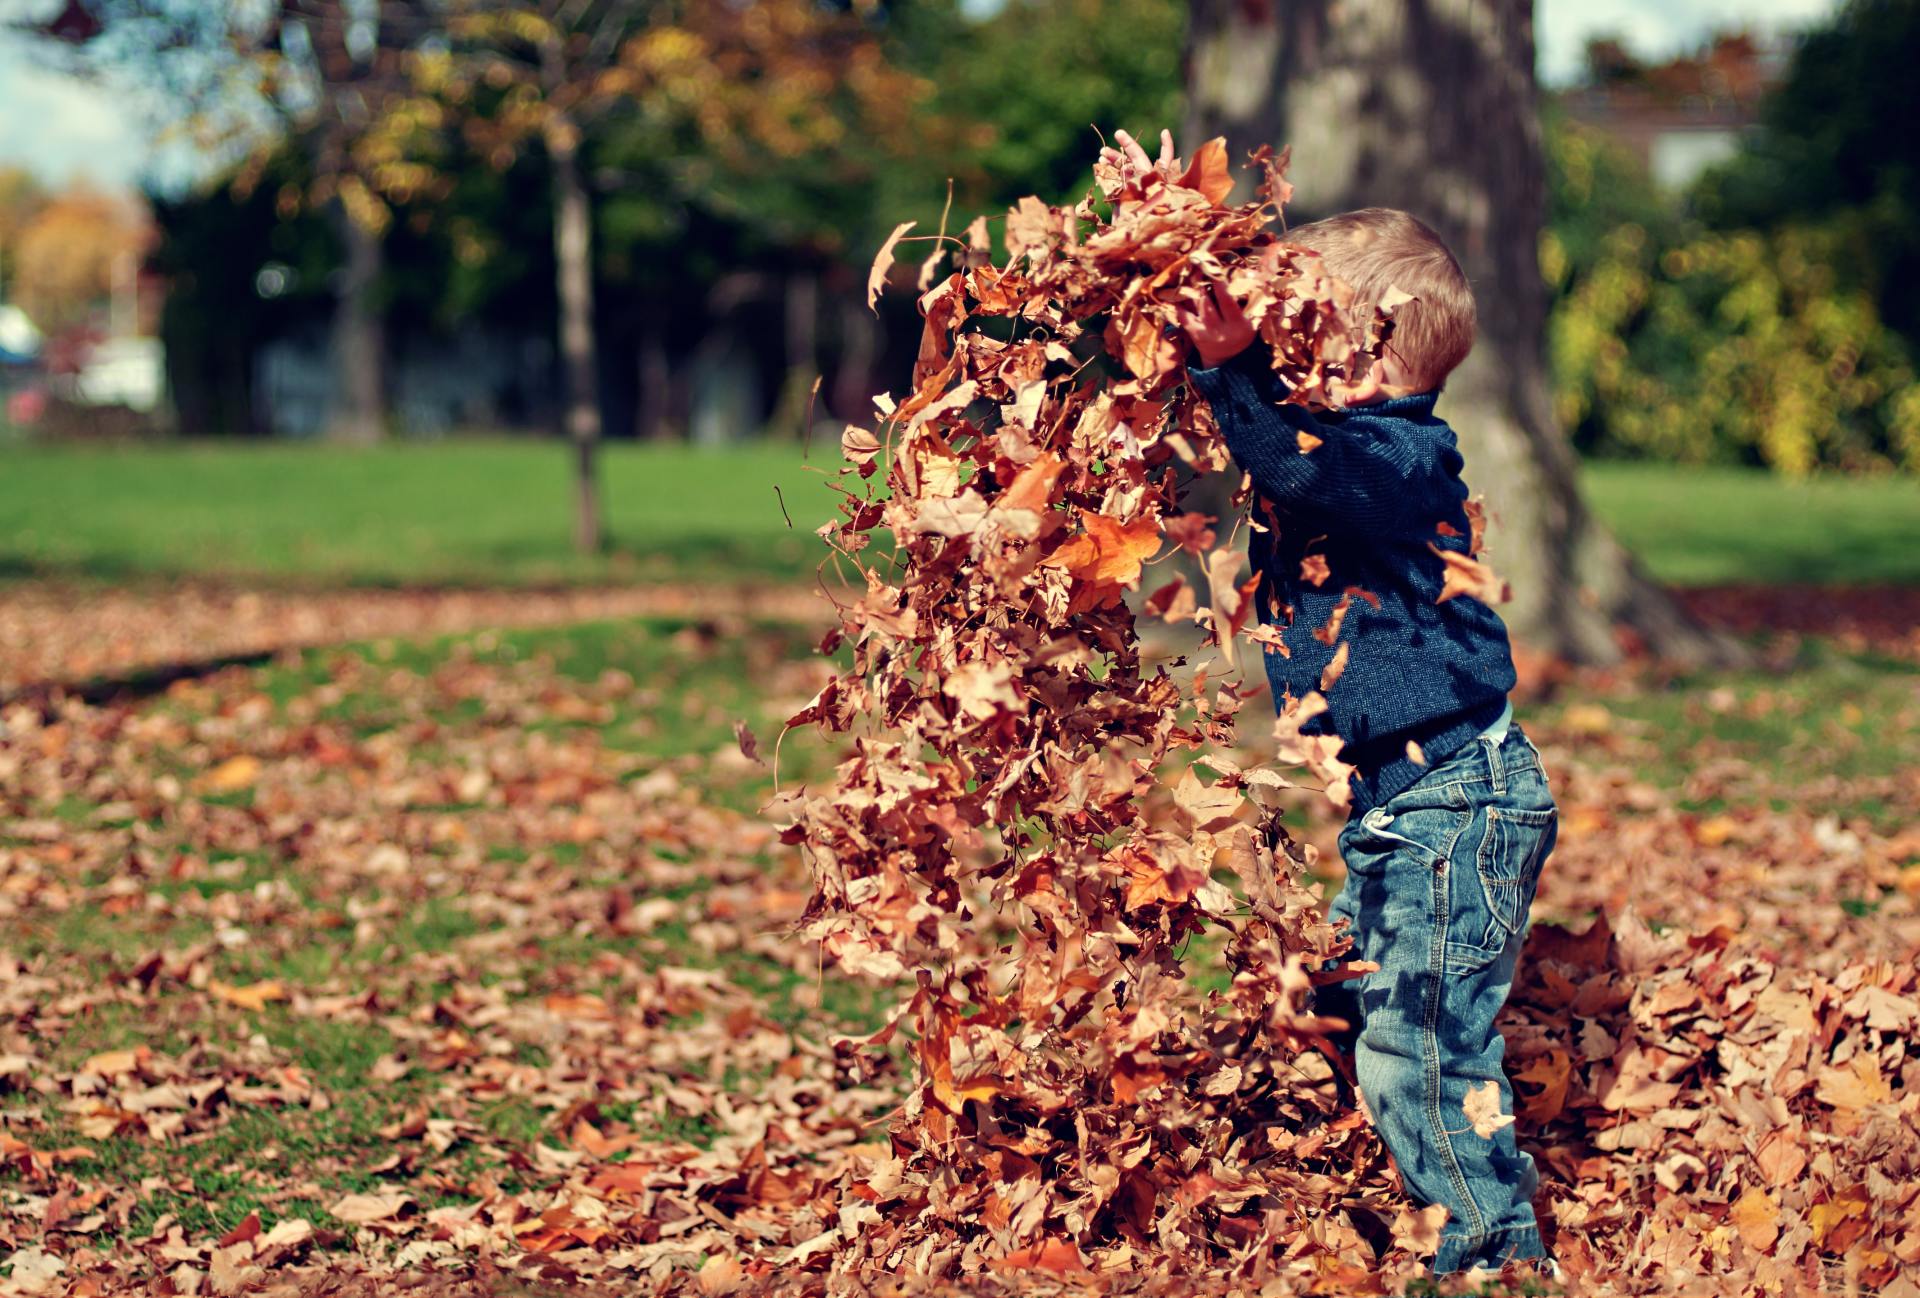 kids playing with leaves on a fall season